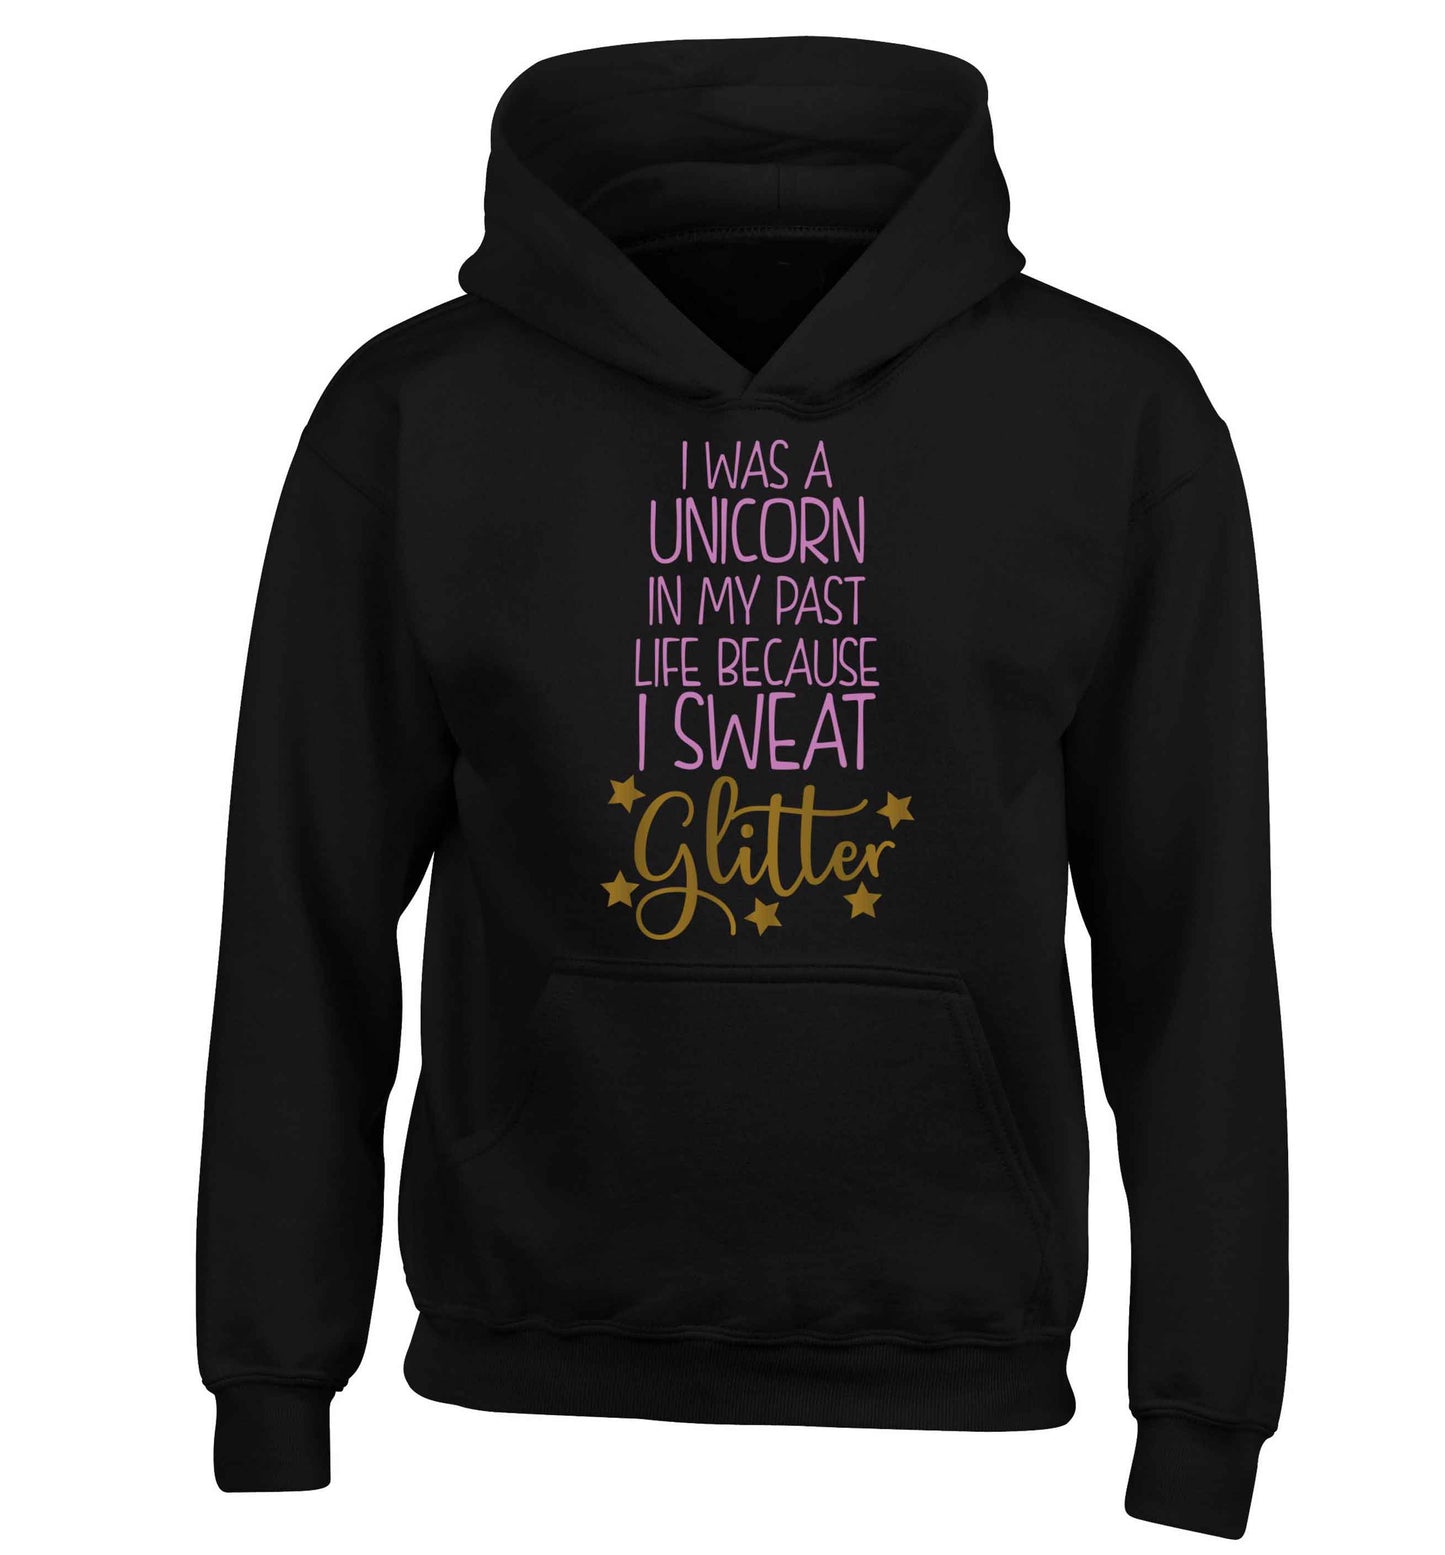 I was a unicorn in my past life because I sweat glitter children's black hoodie 12-13 Years